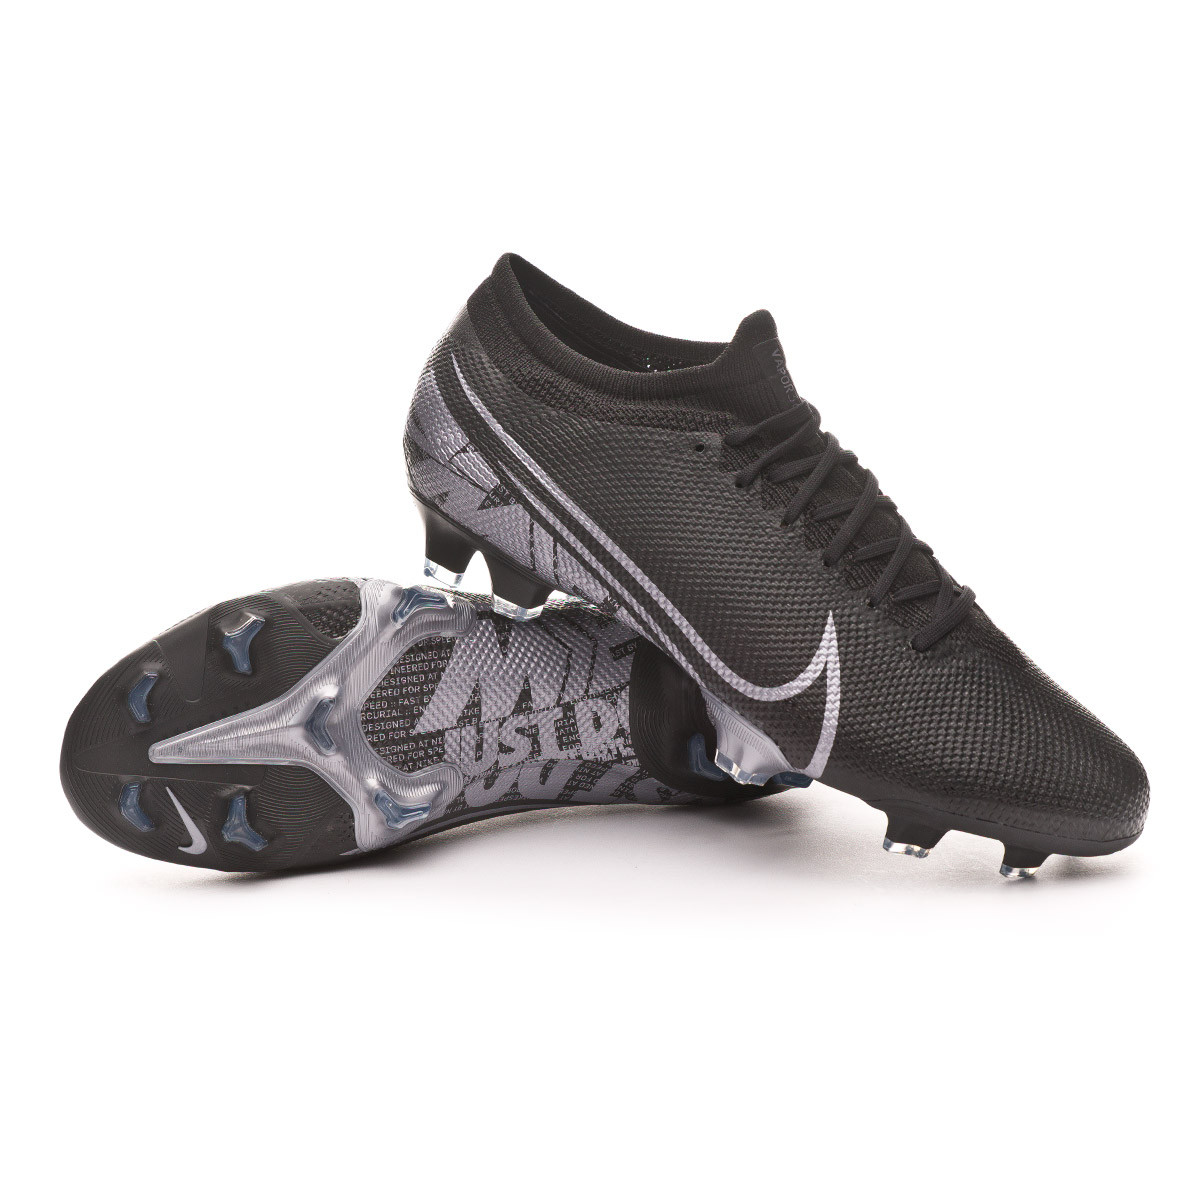 Classy 'Black Lux' Nike Mercurial Vapor 2019 Boots Released